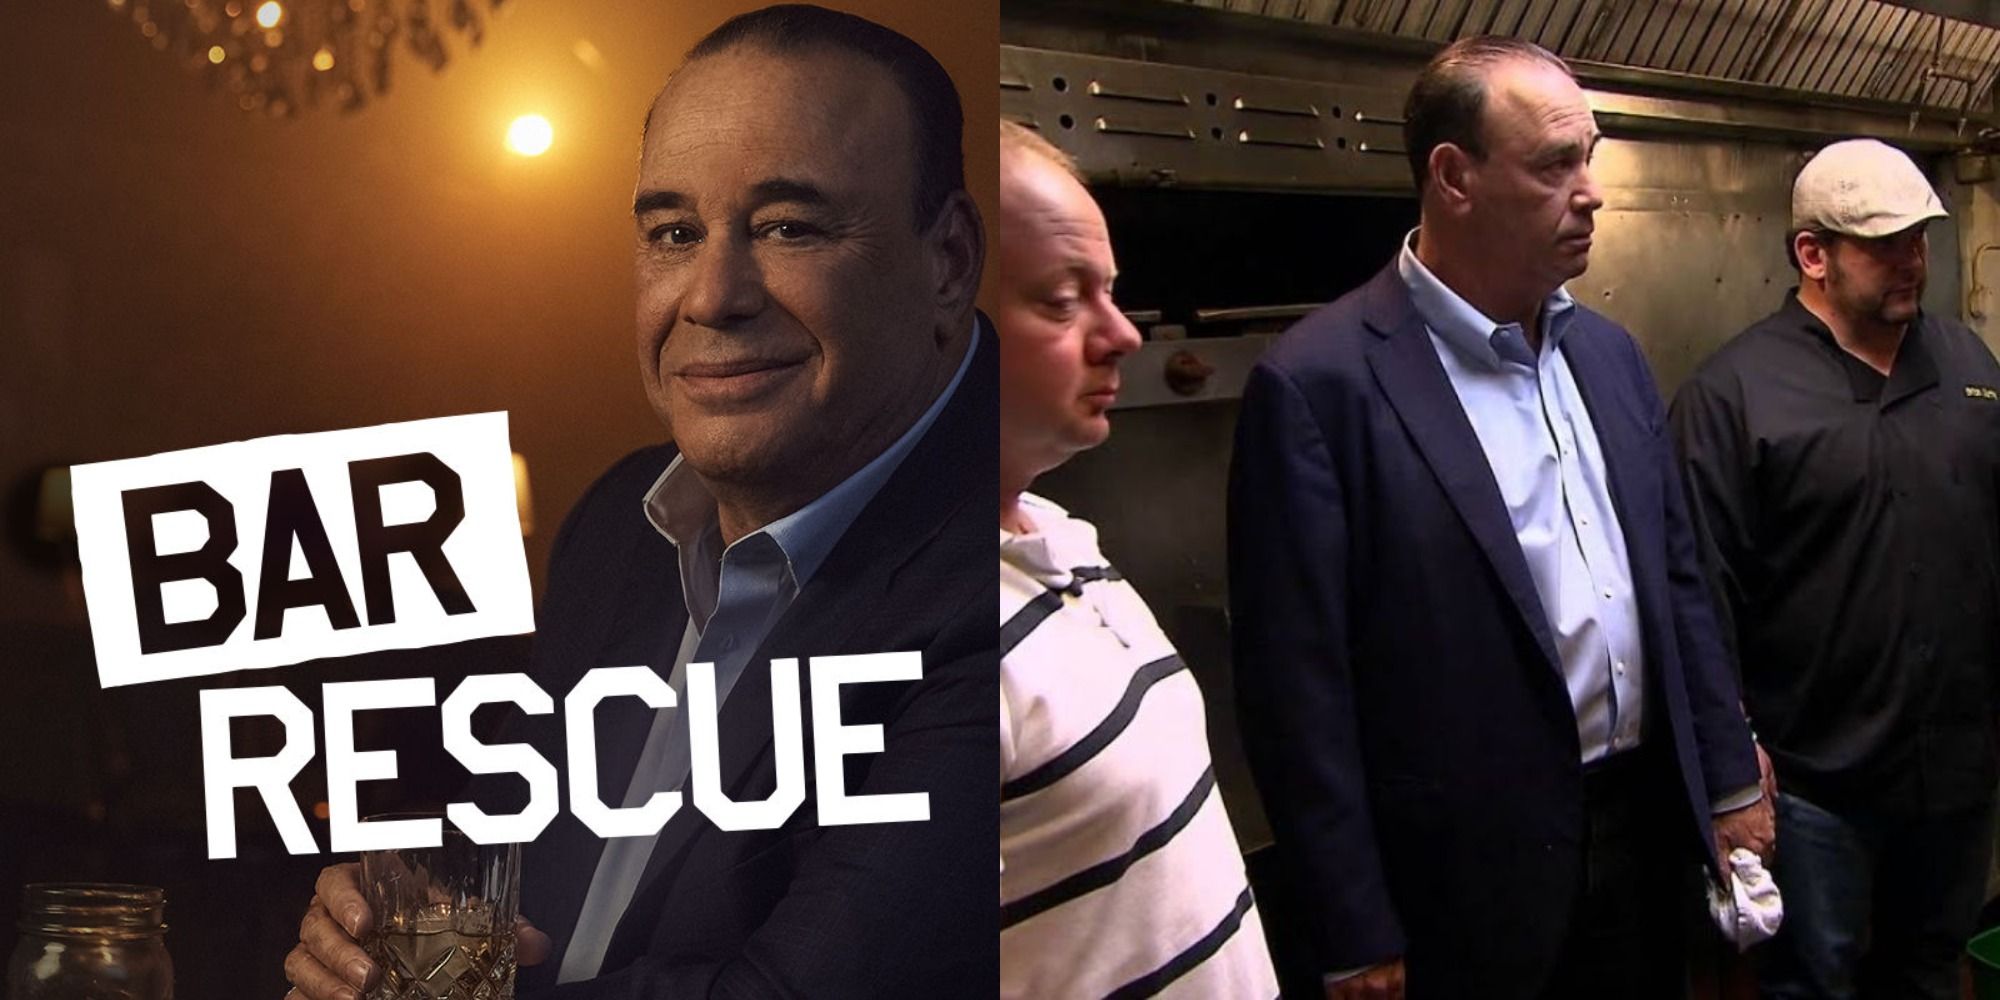 Bar Rescue America Live Bar Rescue: The 10 Most Disgusting Things Jon Taffer Ever Found